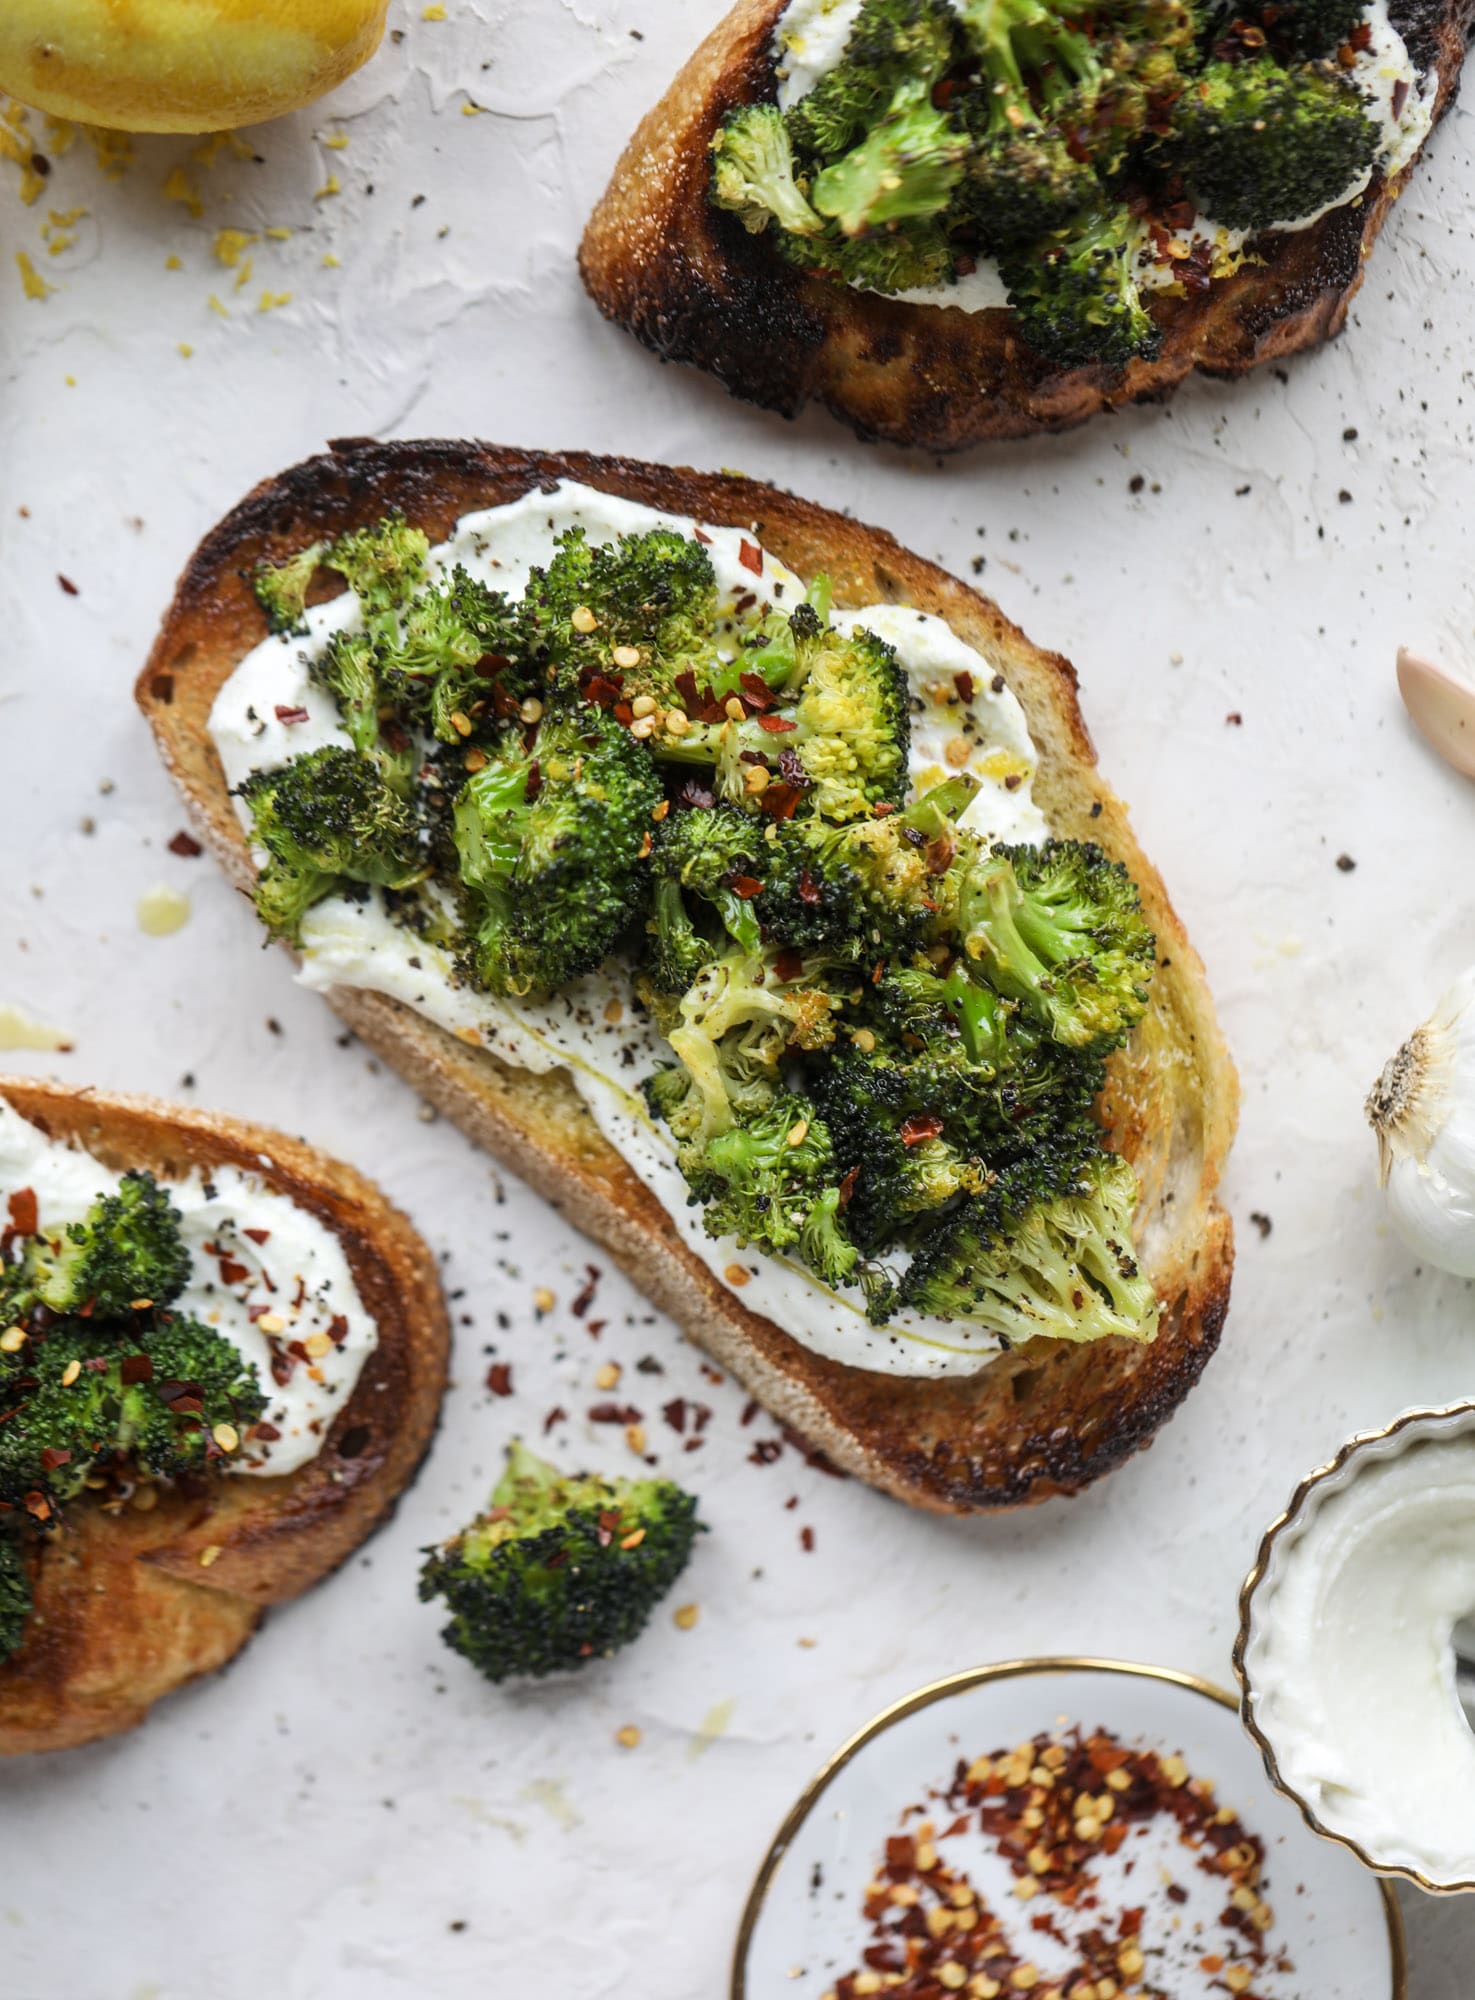 Broccoli toast is the best way to sneak in some veggies! Toasted sourdough with ricotta and roasted broccoli, topped with lemon and crushed red pepper. 